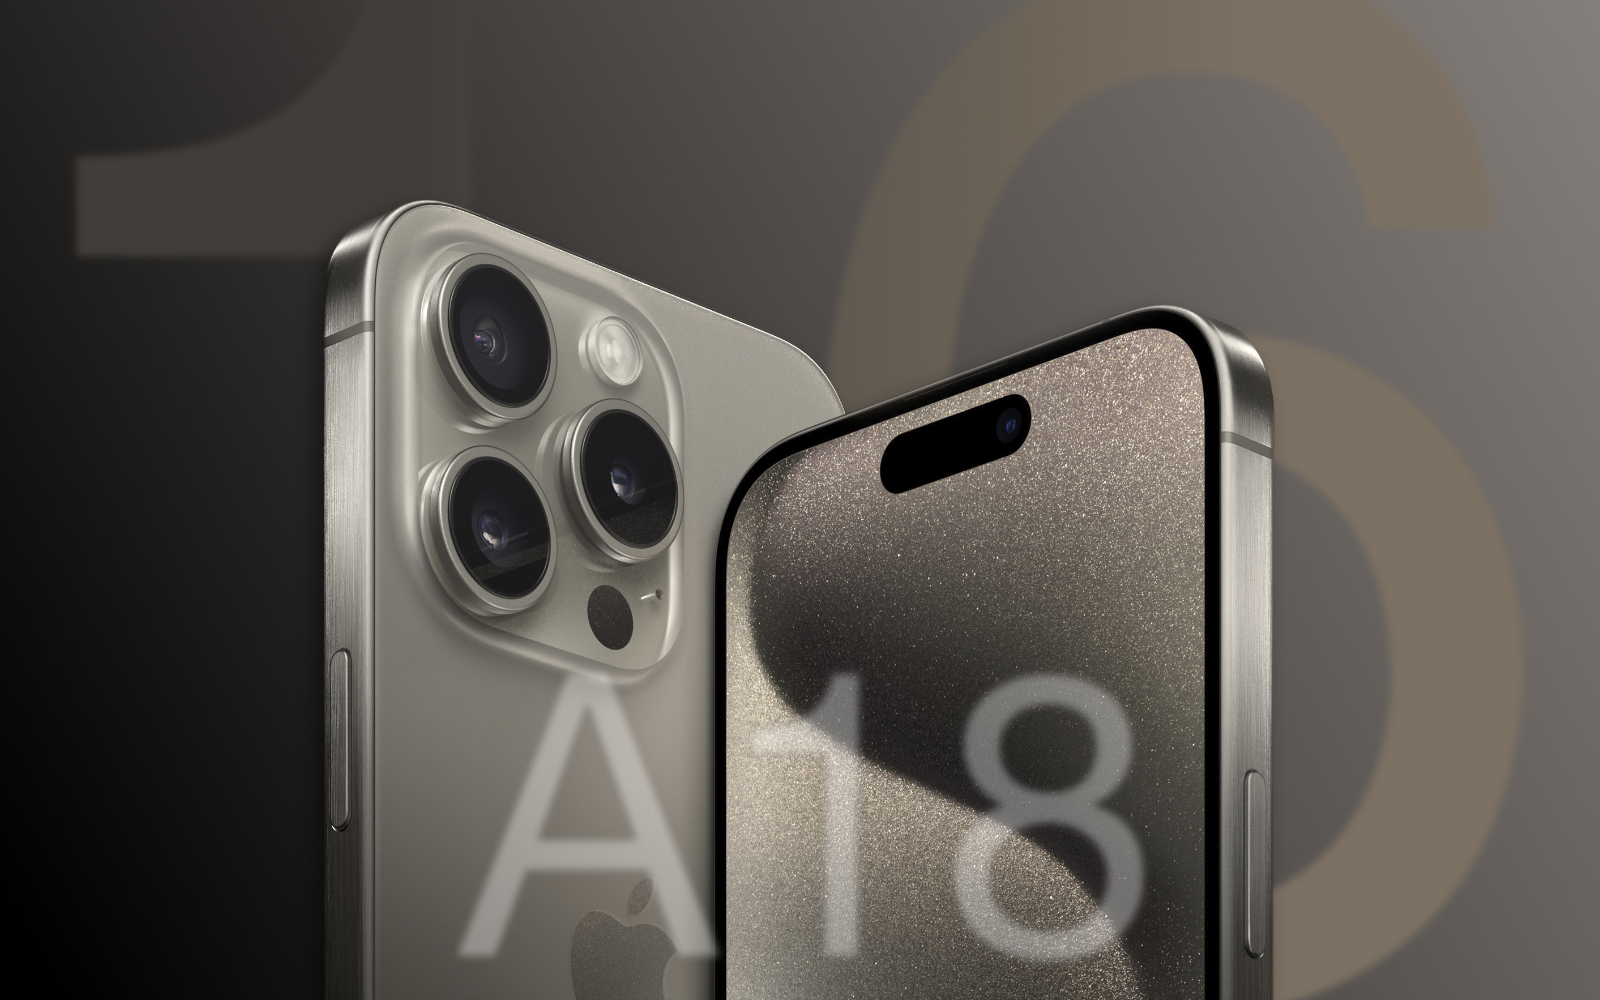 Iphone16 pro rumors a18